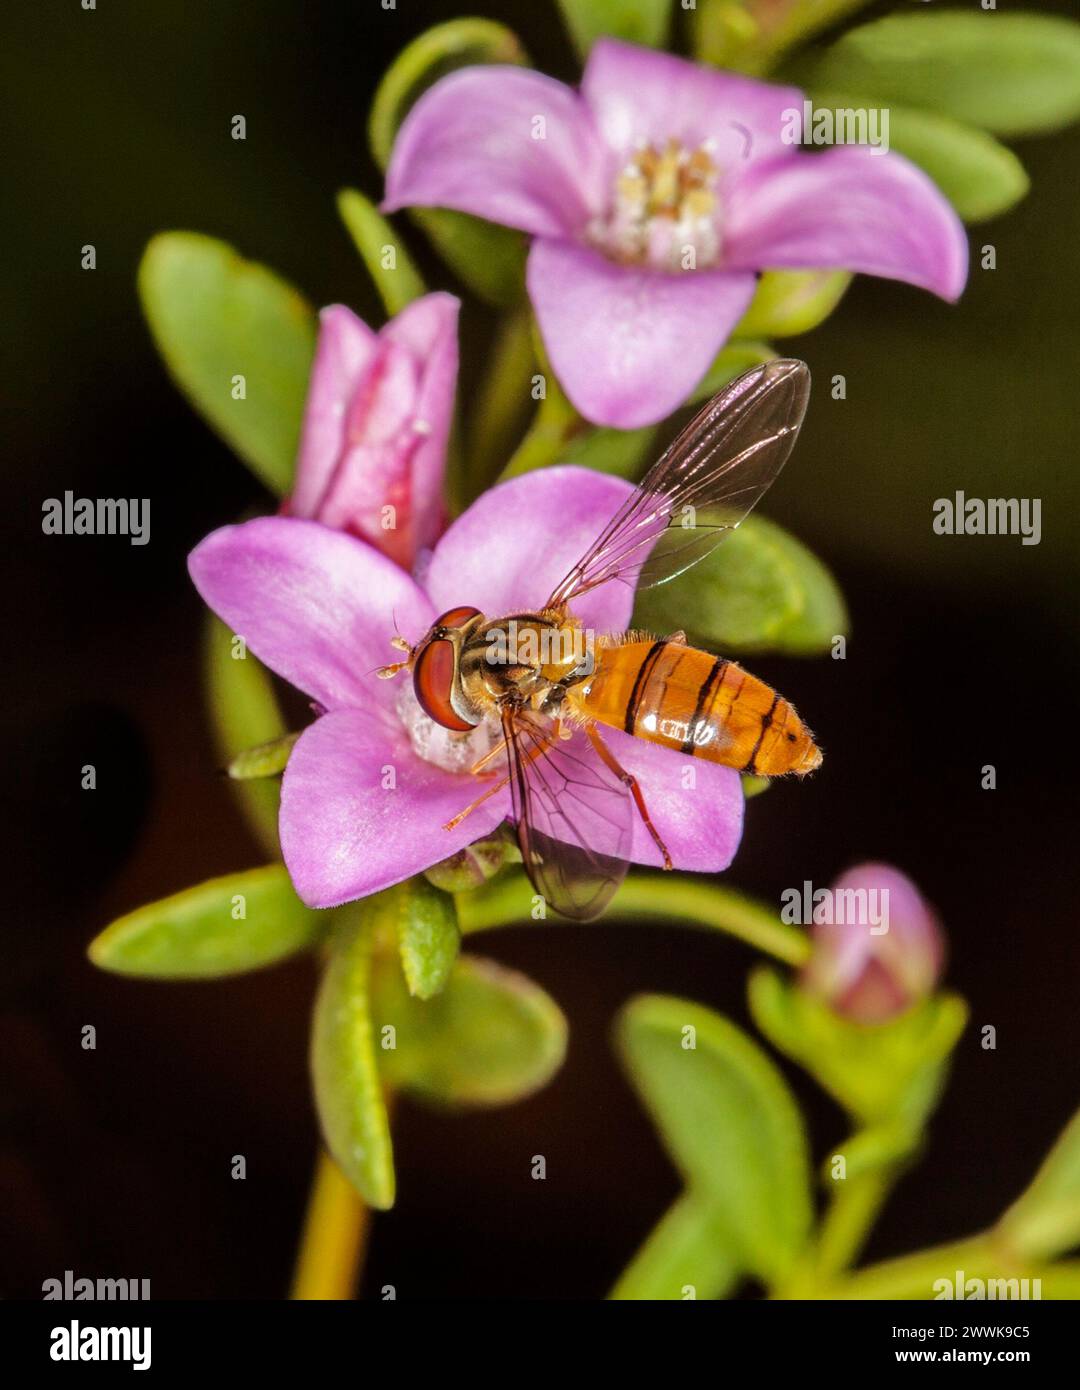 Stunning image of Hoverfly, a beneficial insect, on pink flowers of Australian native shrub Boronia crenulata 'Pink Passion' against dark background Stock Photo